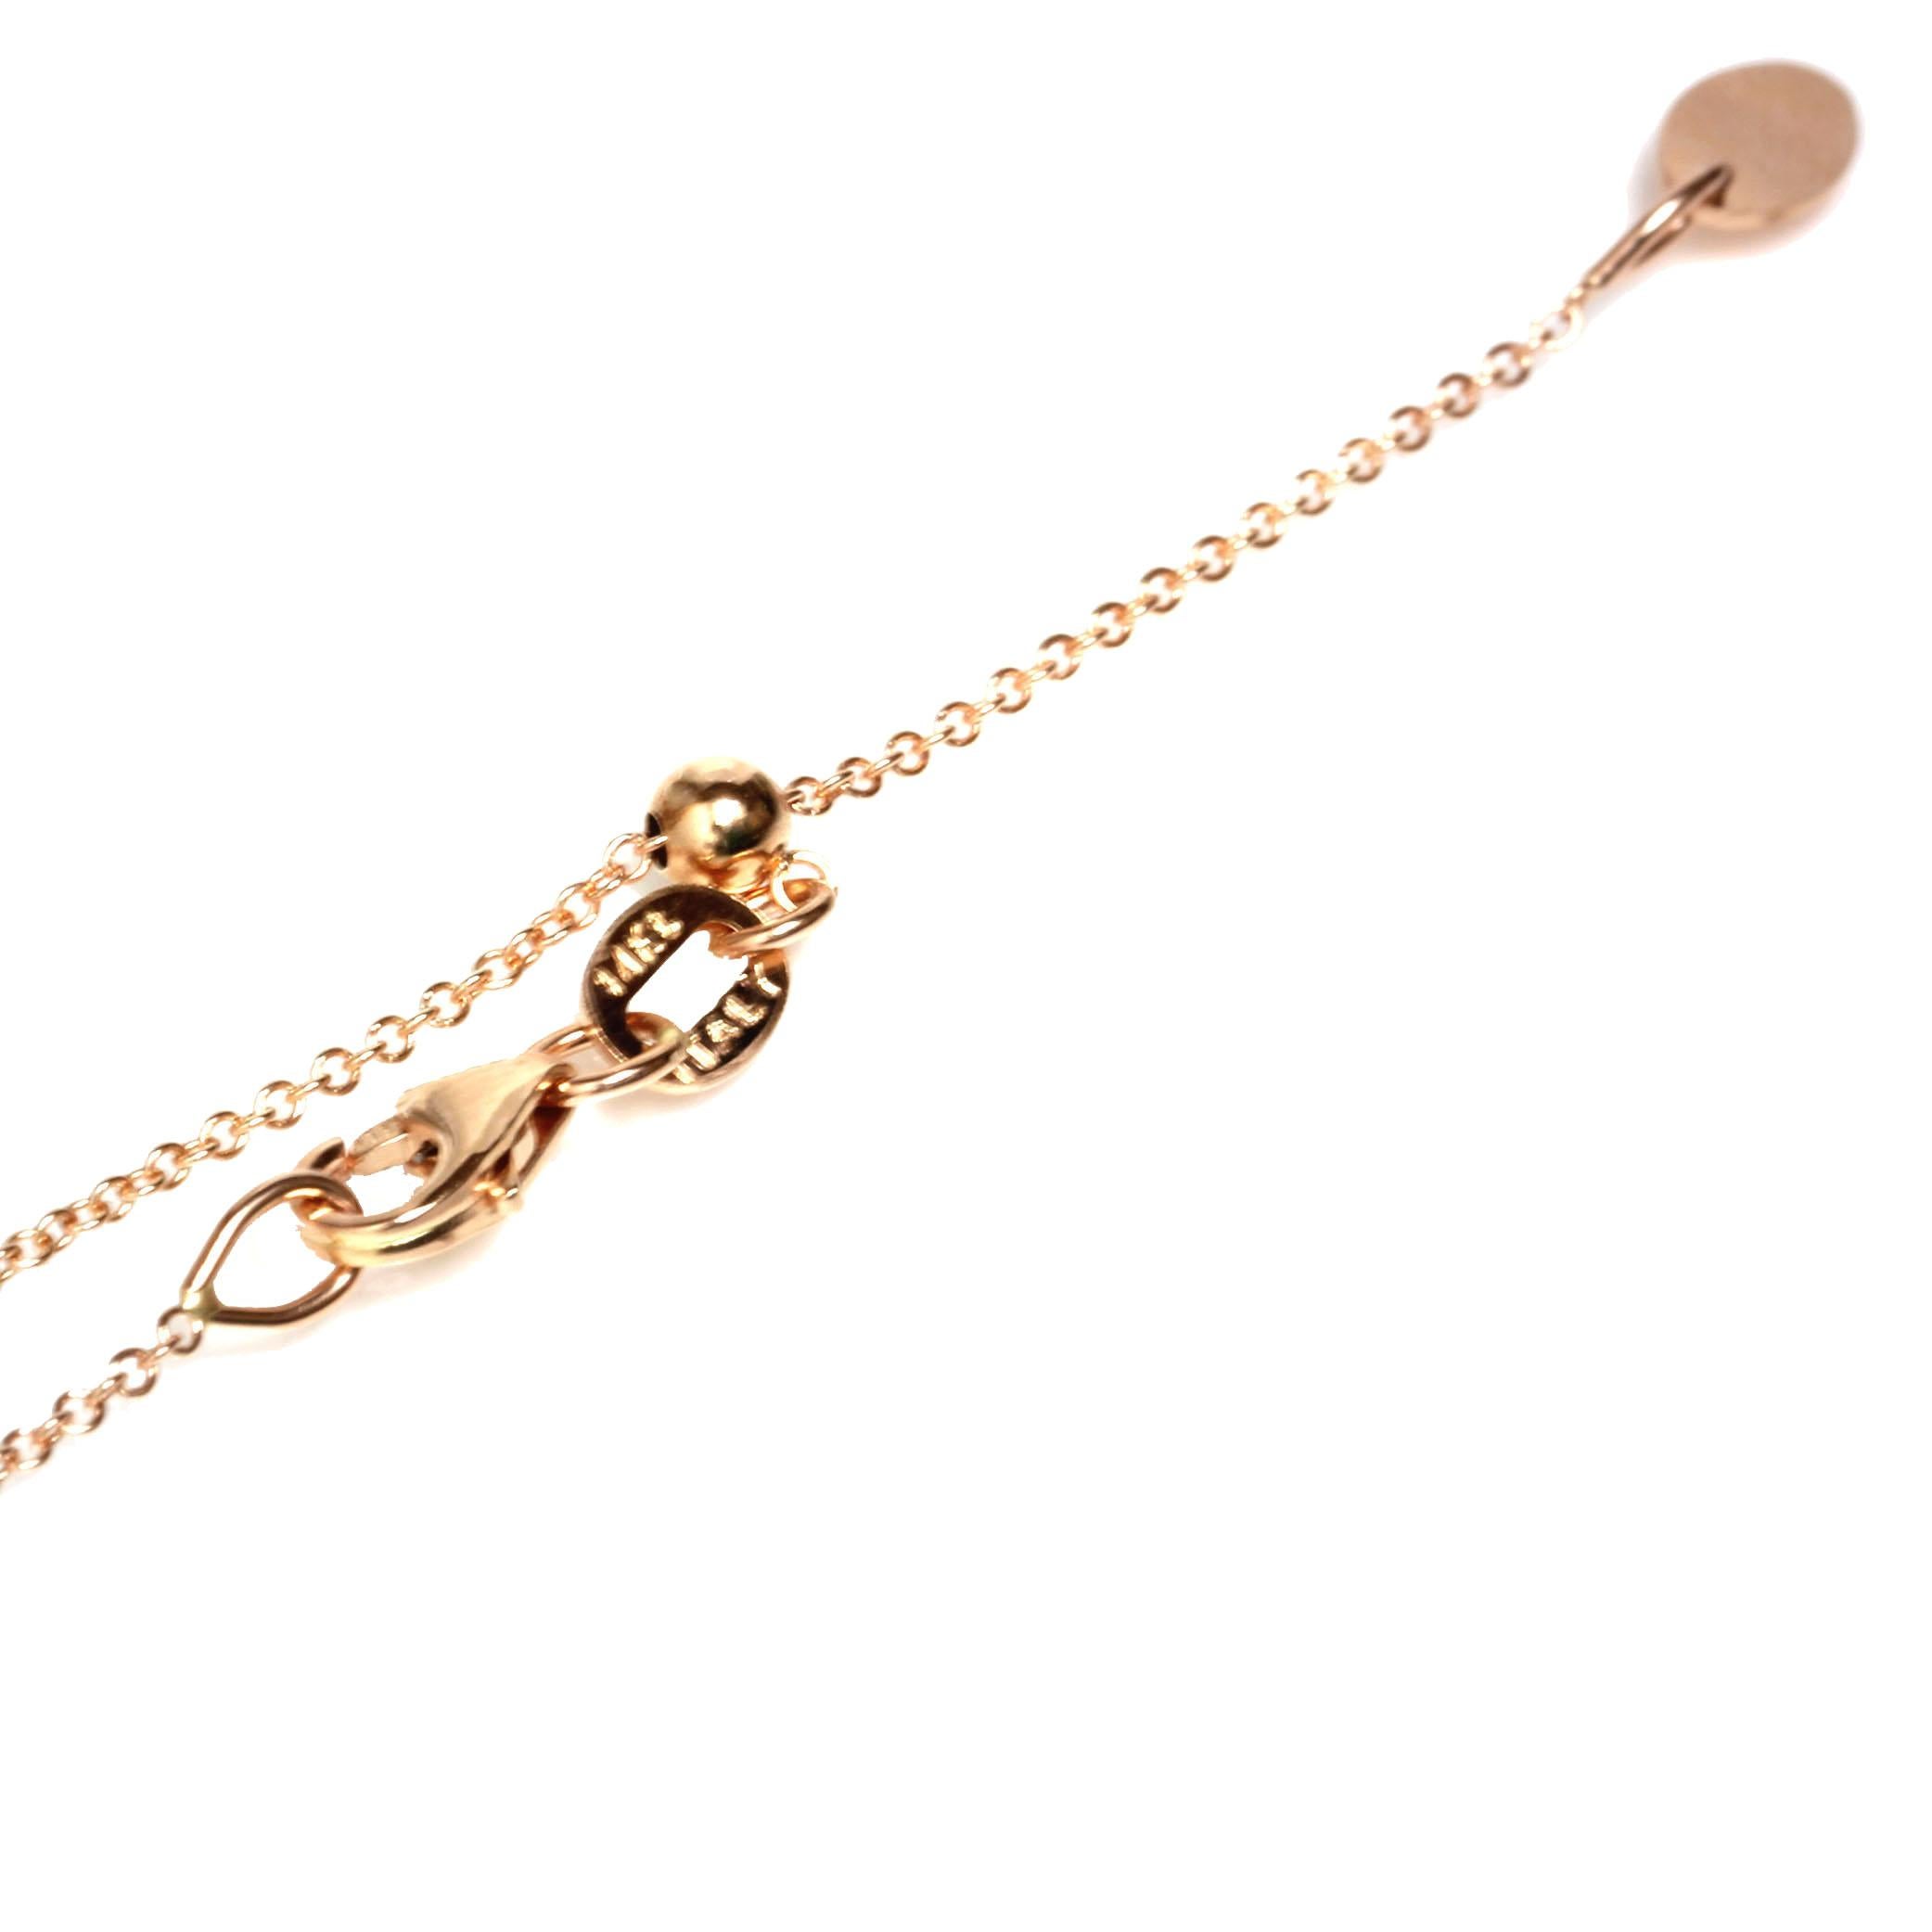 Easy to use adjustable length solid 14k rose gold chain, you can simply slide the ball to shorten the necklace to any shorter length you wish. The chain is made in Italy and it is stamped 14k. The chain is 1.3mm in thickness and 24